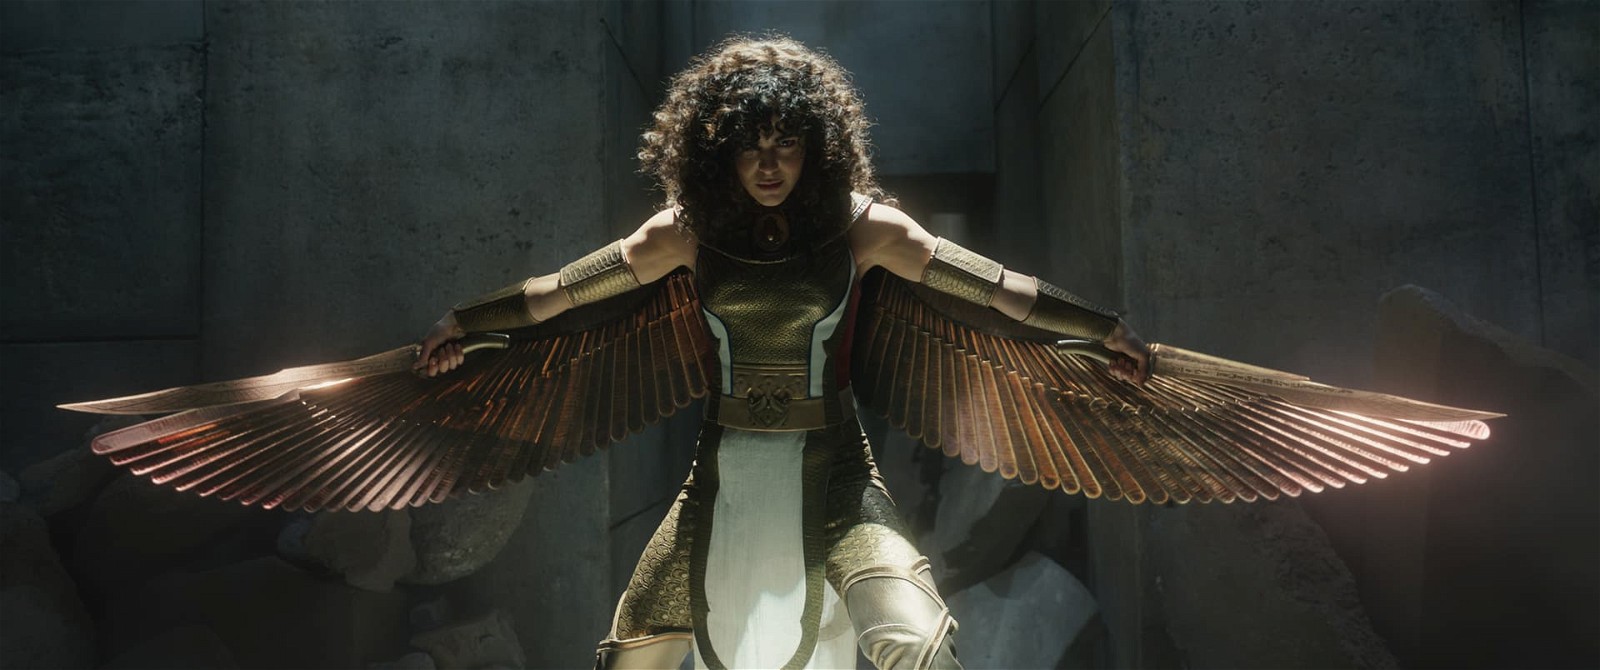 May Calamawy as Layla/ Scarlet Scarab in Moon Knight